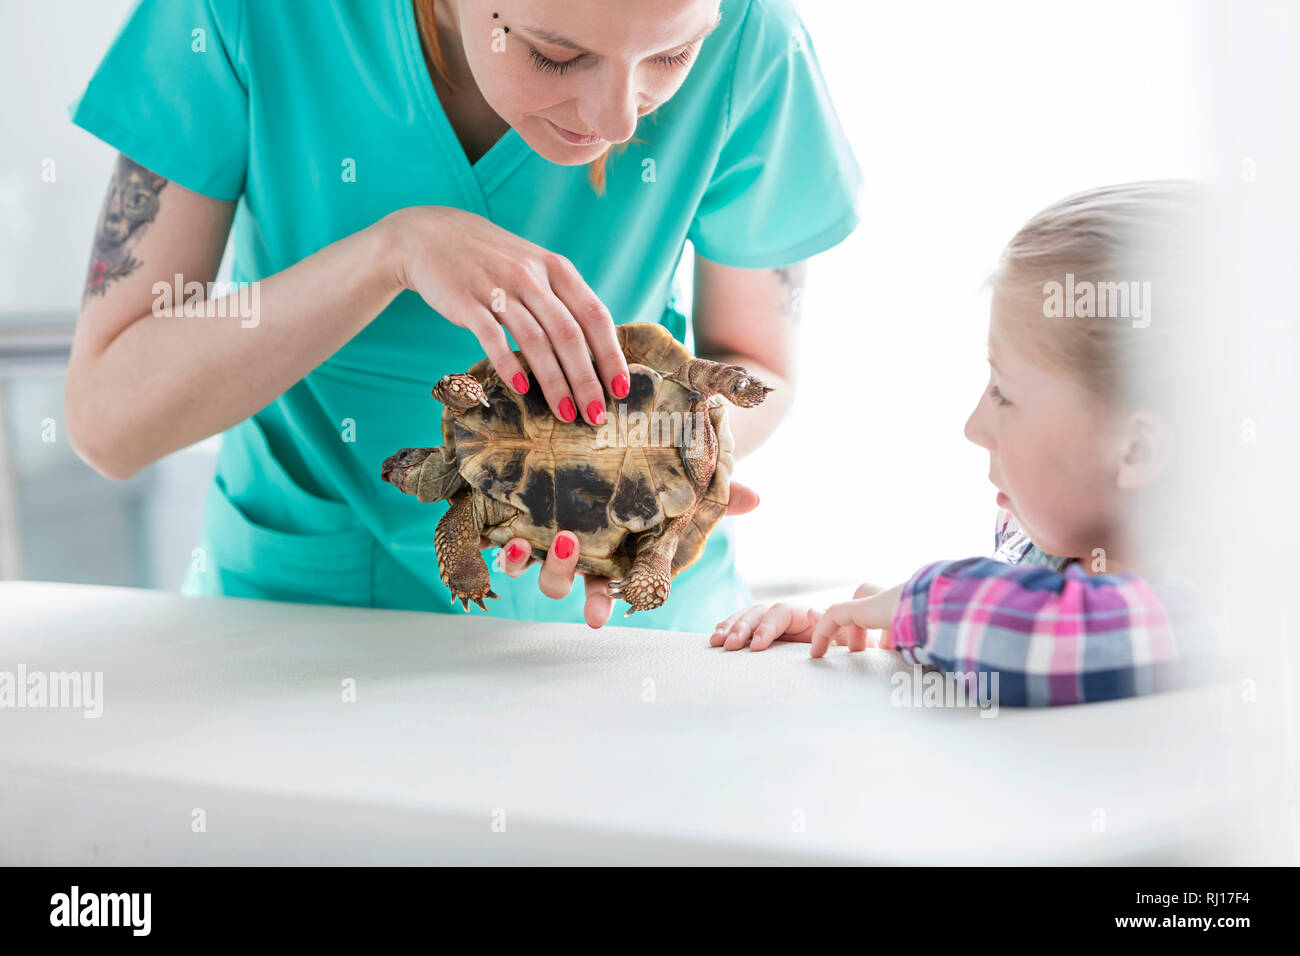 Girl looking at doctor examining turtle in veterinary clinic Stock Photo